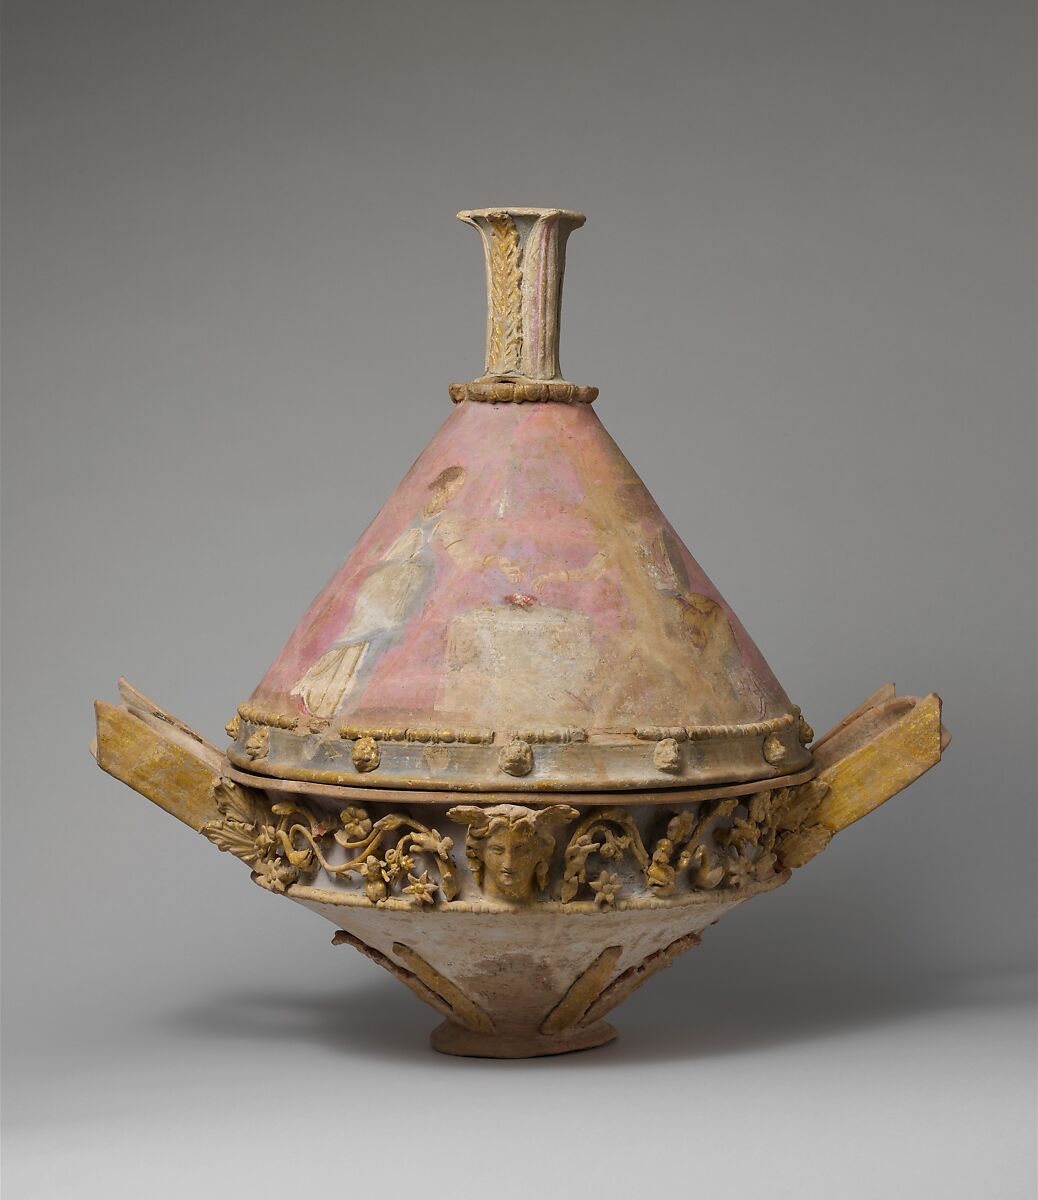 Terracotta lekanis (dish) with lid and finial